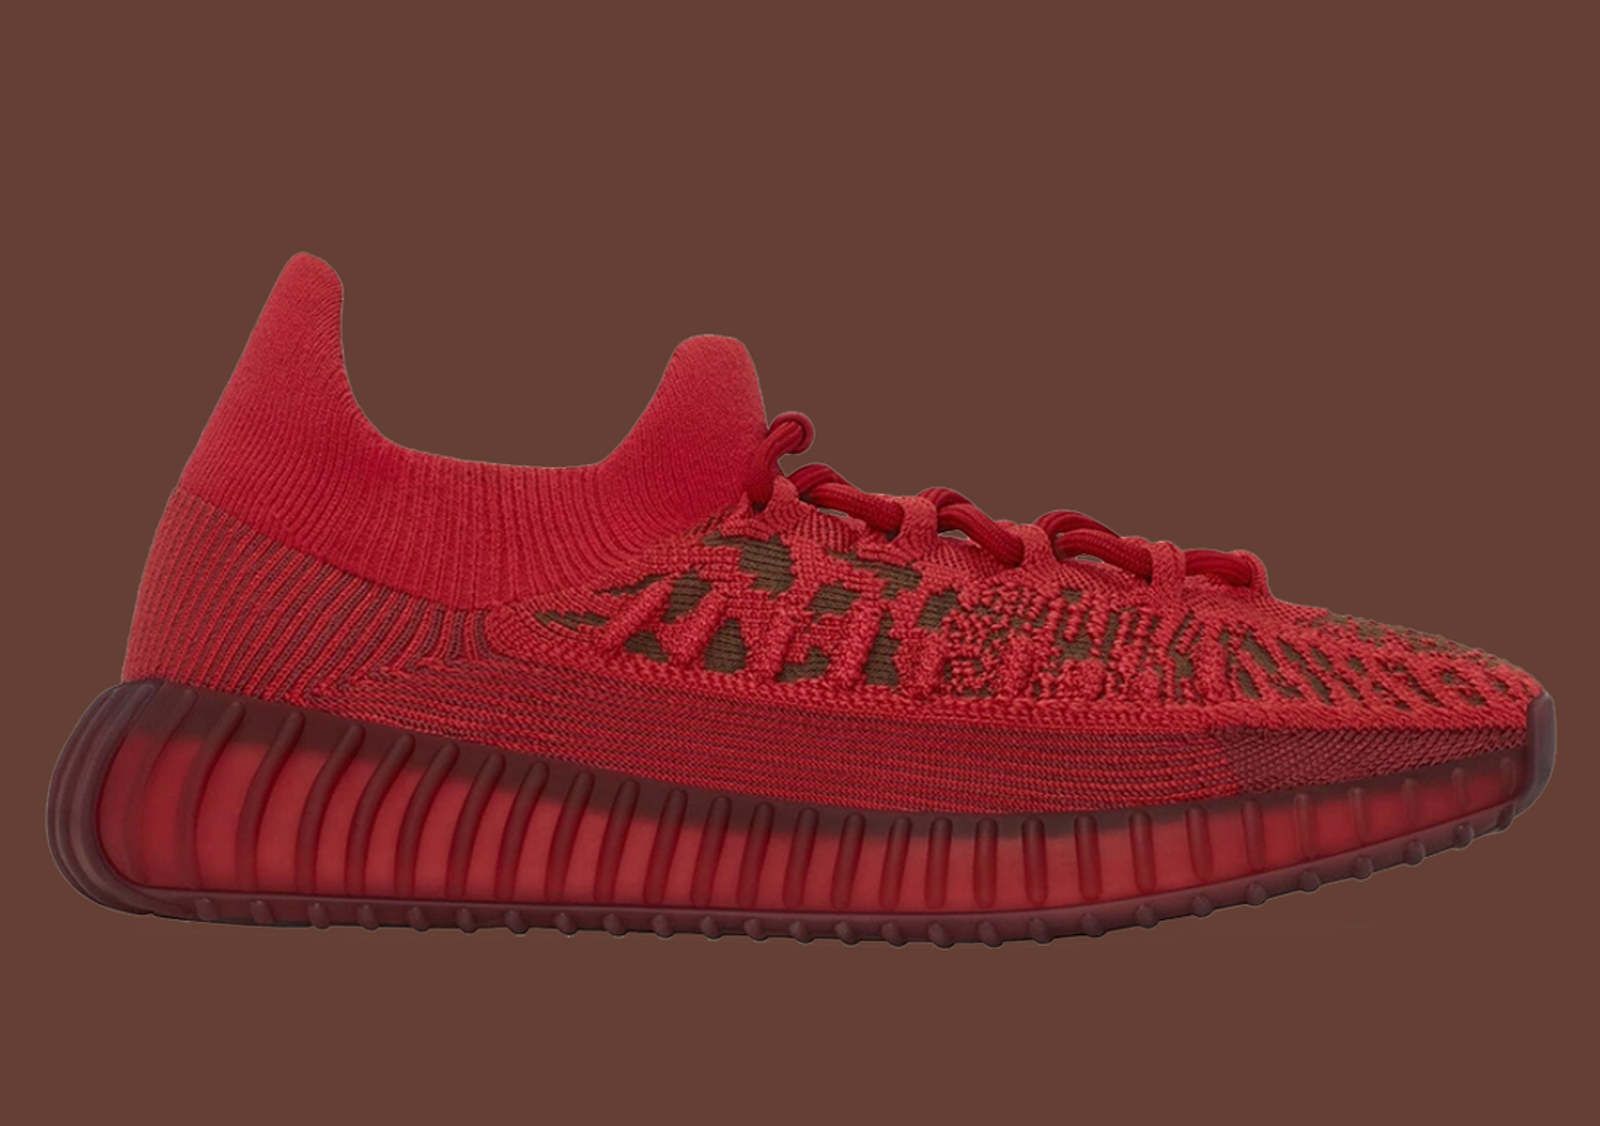 adidas Yeezy Boost 350 V2 CMPCT "Slate Red"